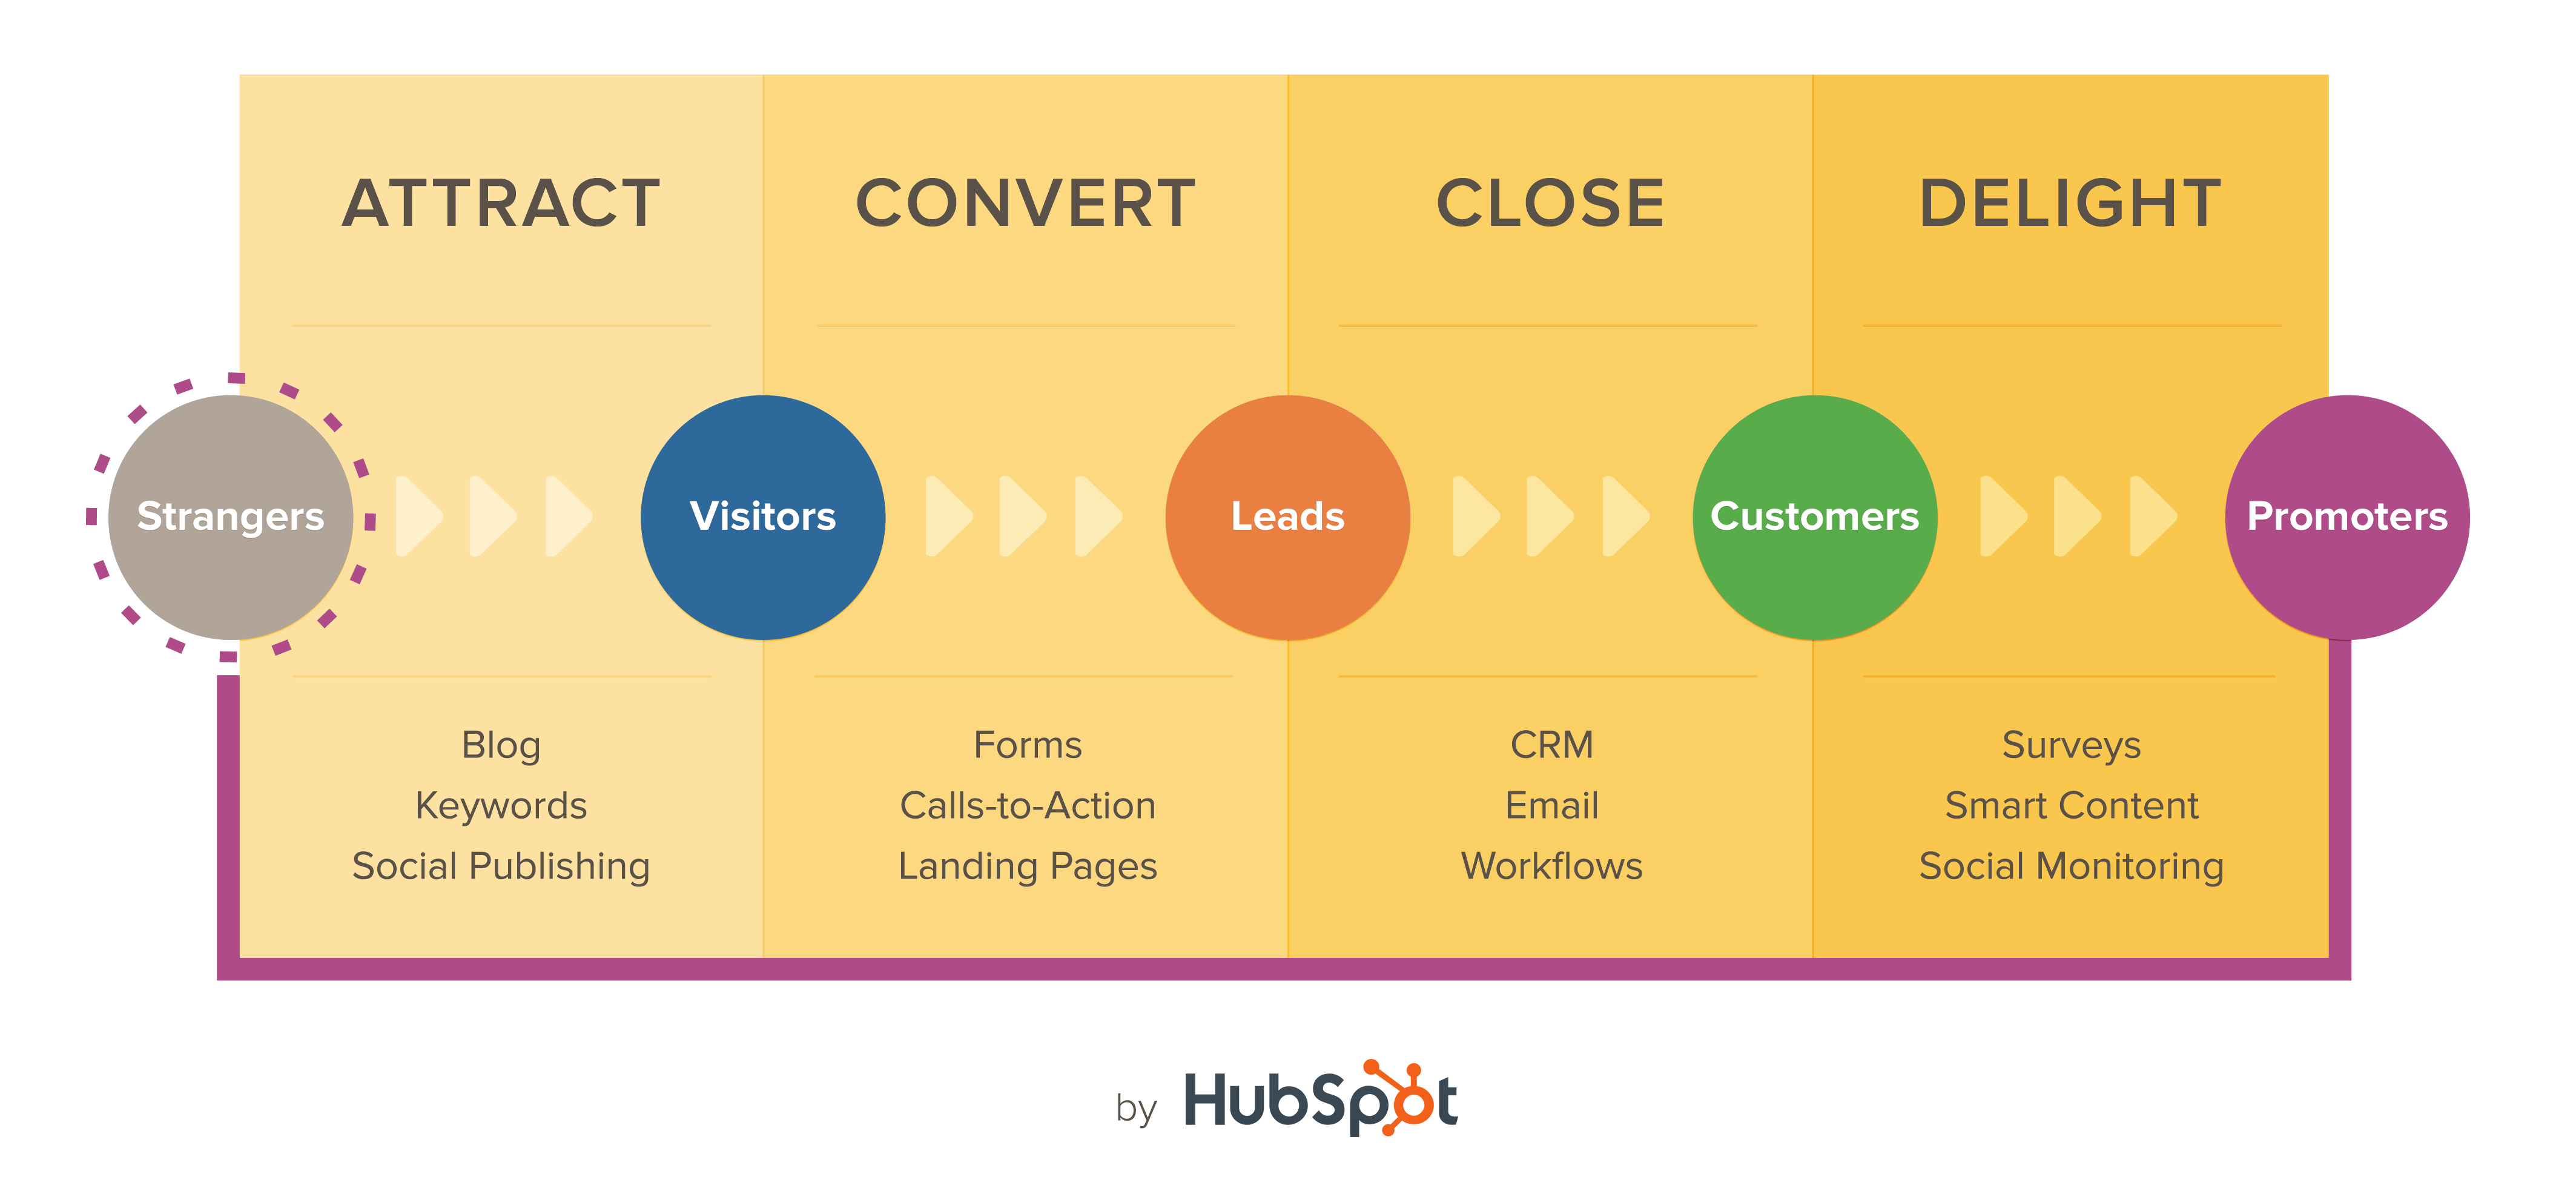 What is HubSpot?